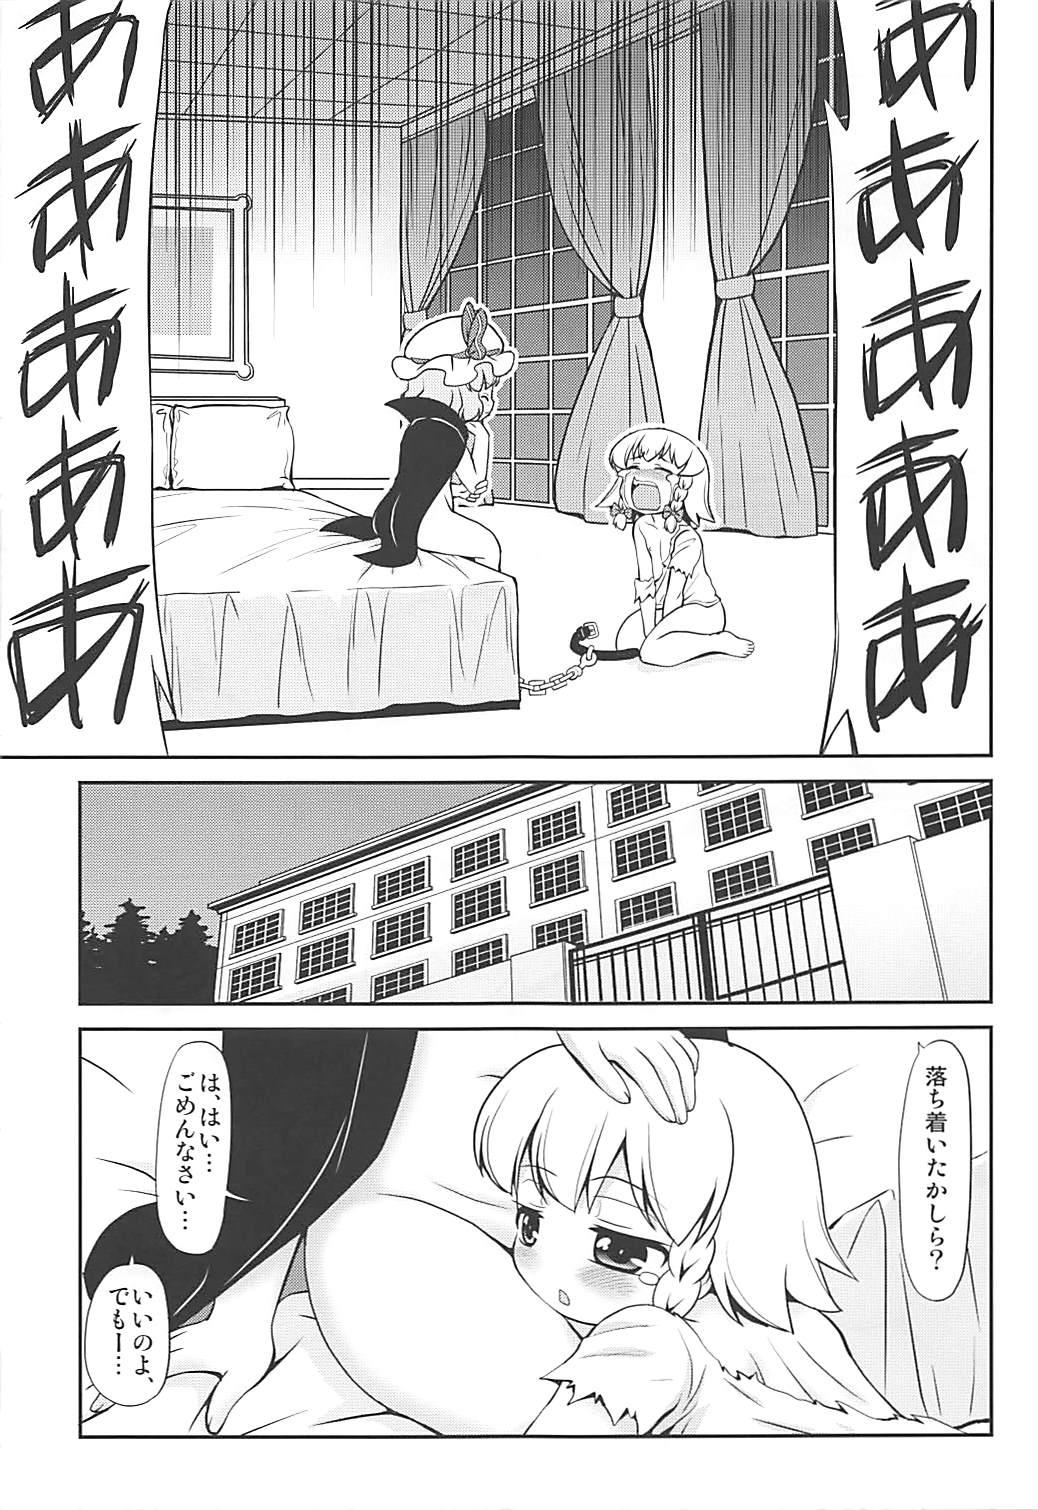 Humiliation Lealtad - Touhou project Milfs - Page 8